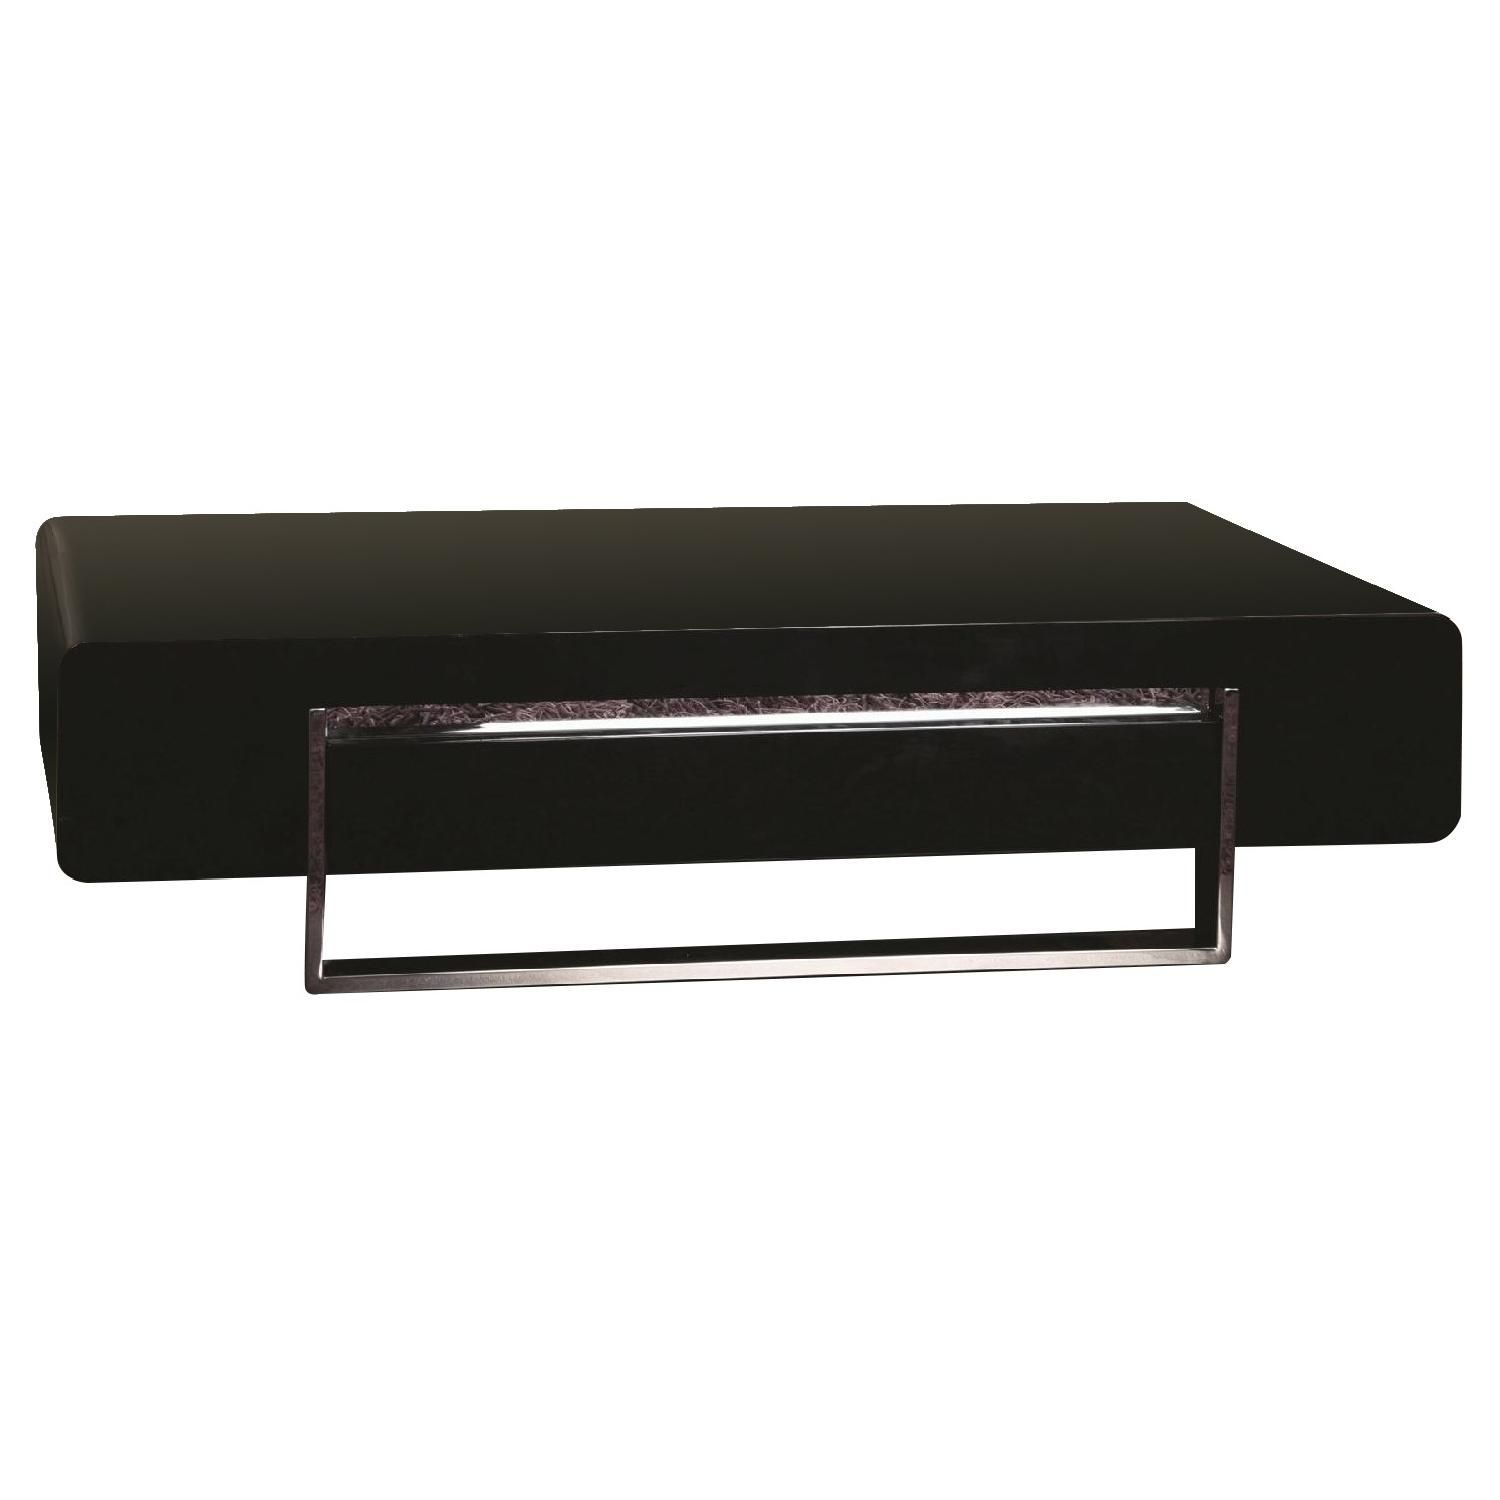 Modern Coffee Table In High Gloss Black Finish W/ Storage Dr – Aptdeco In High Gloss Black Coffee Tables (View 10 of 20)